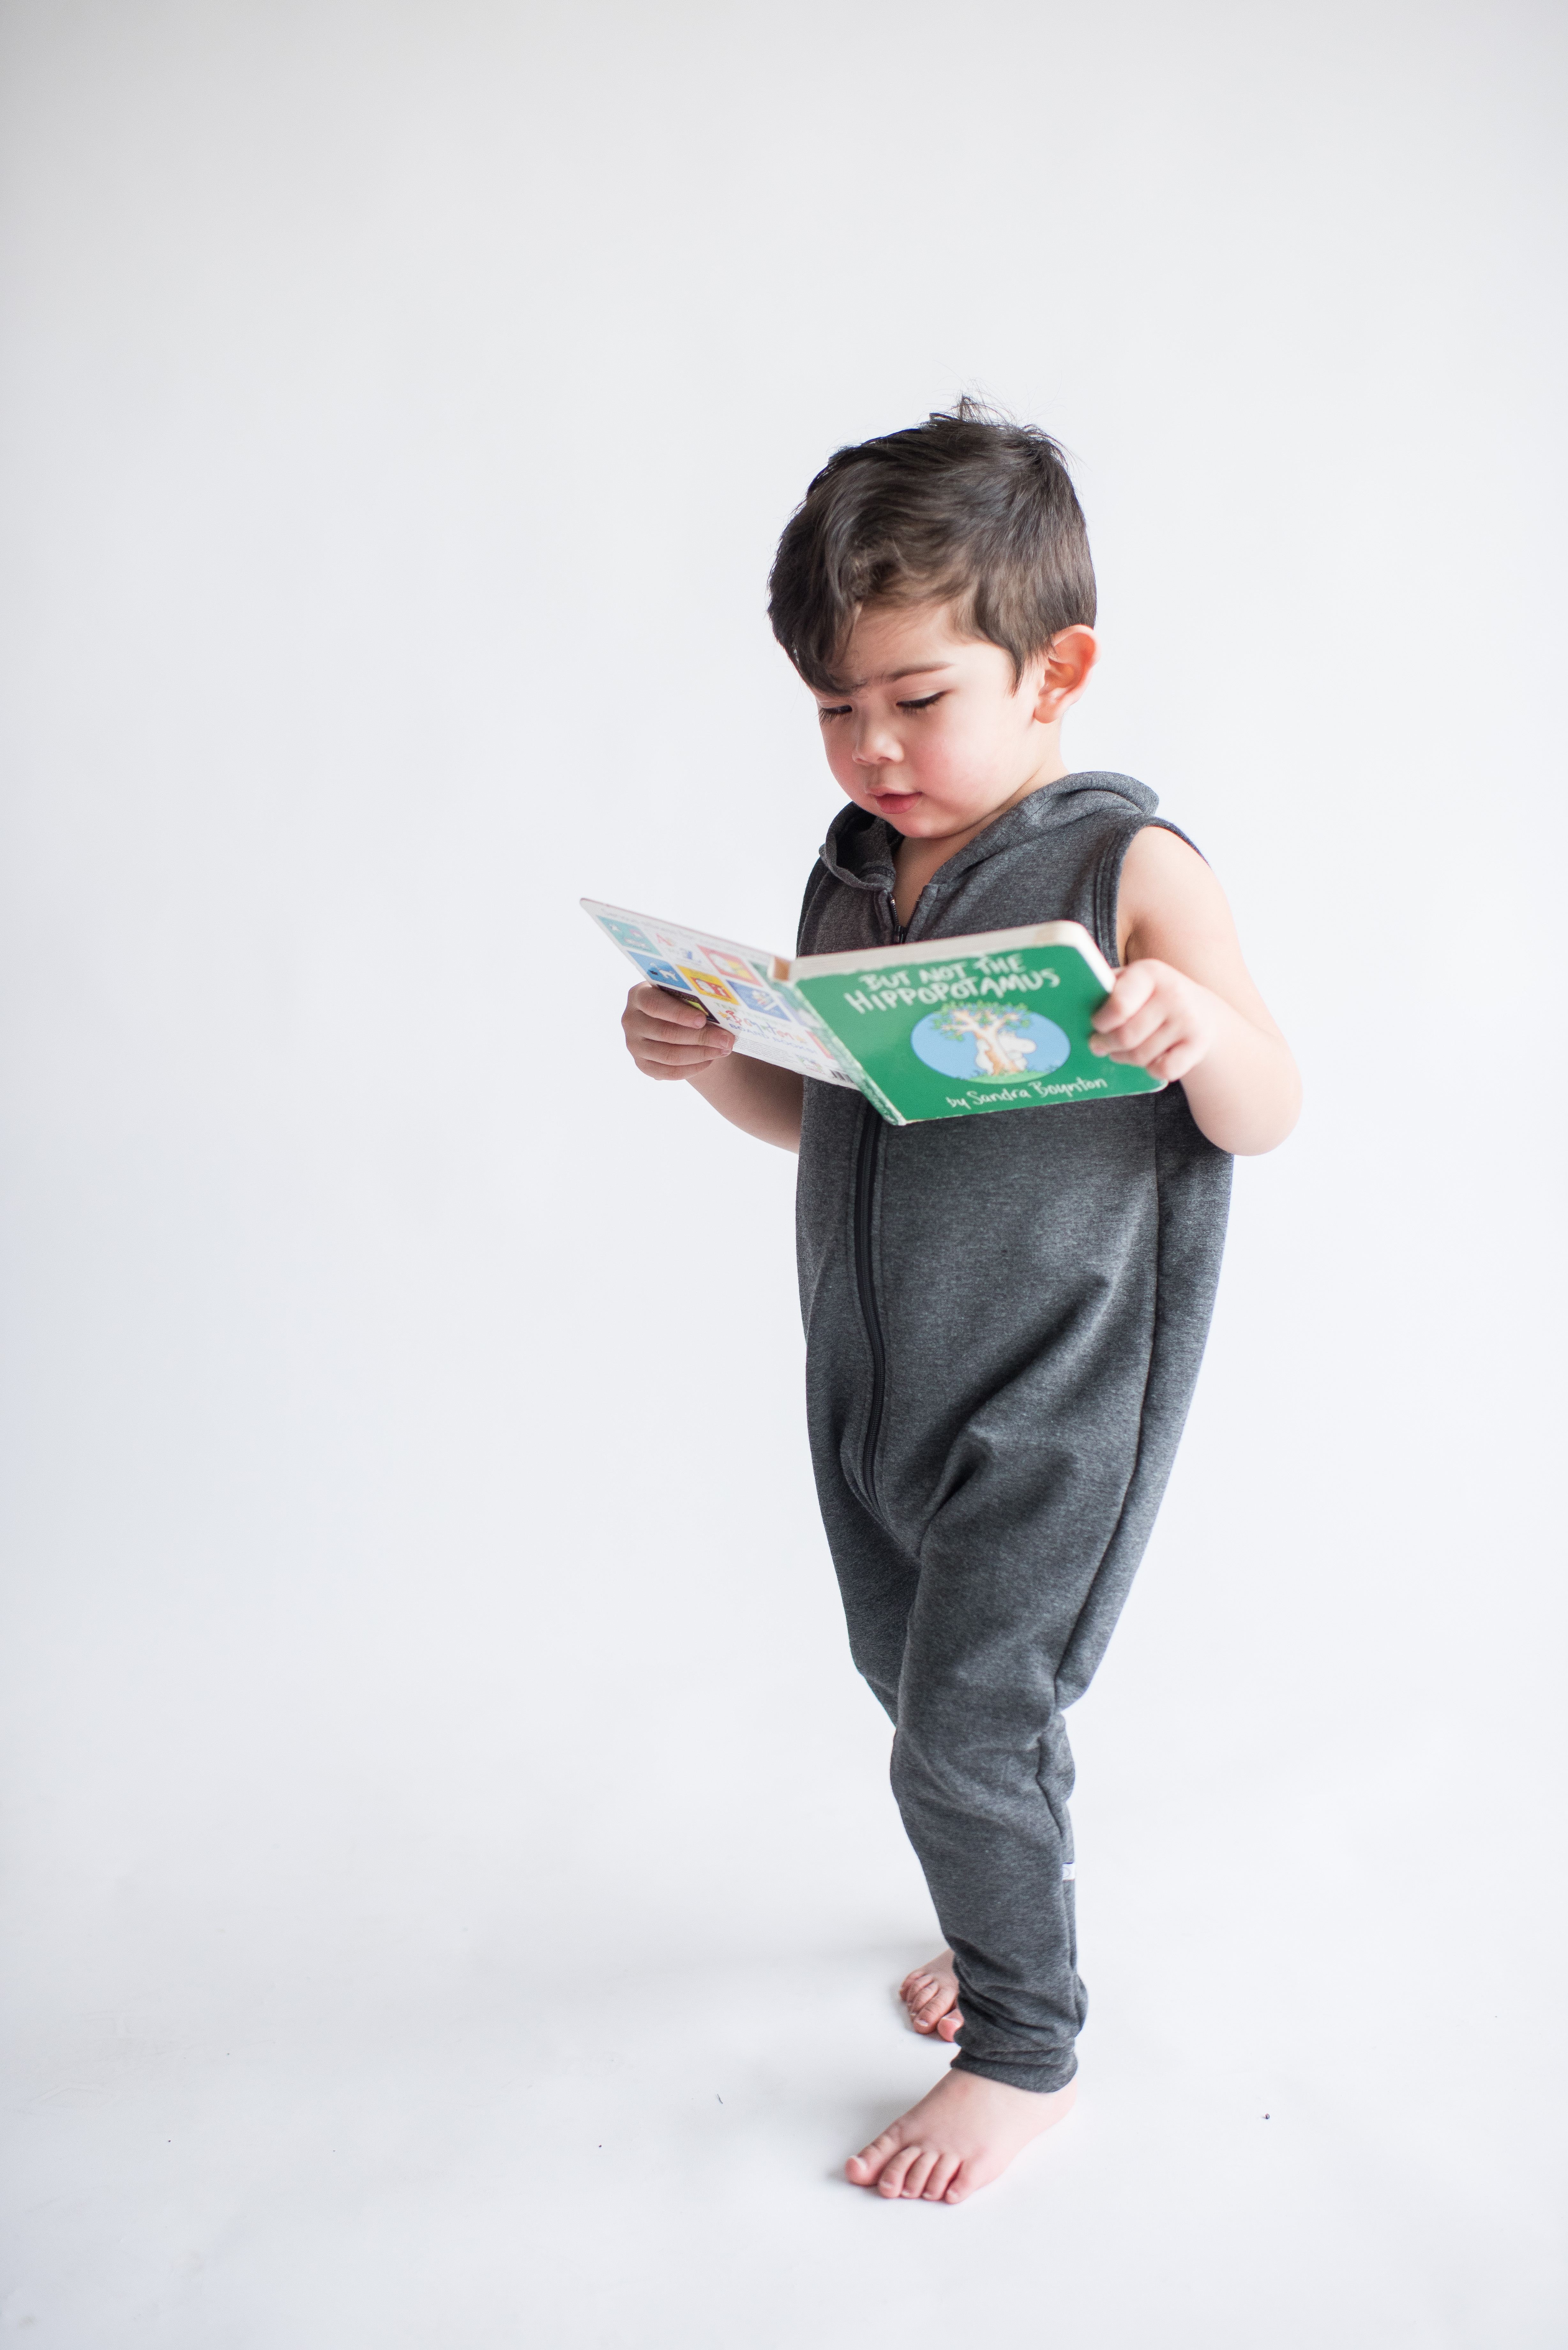 #playtexreads, Classic Toddler books to read to your toddler